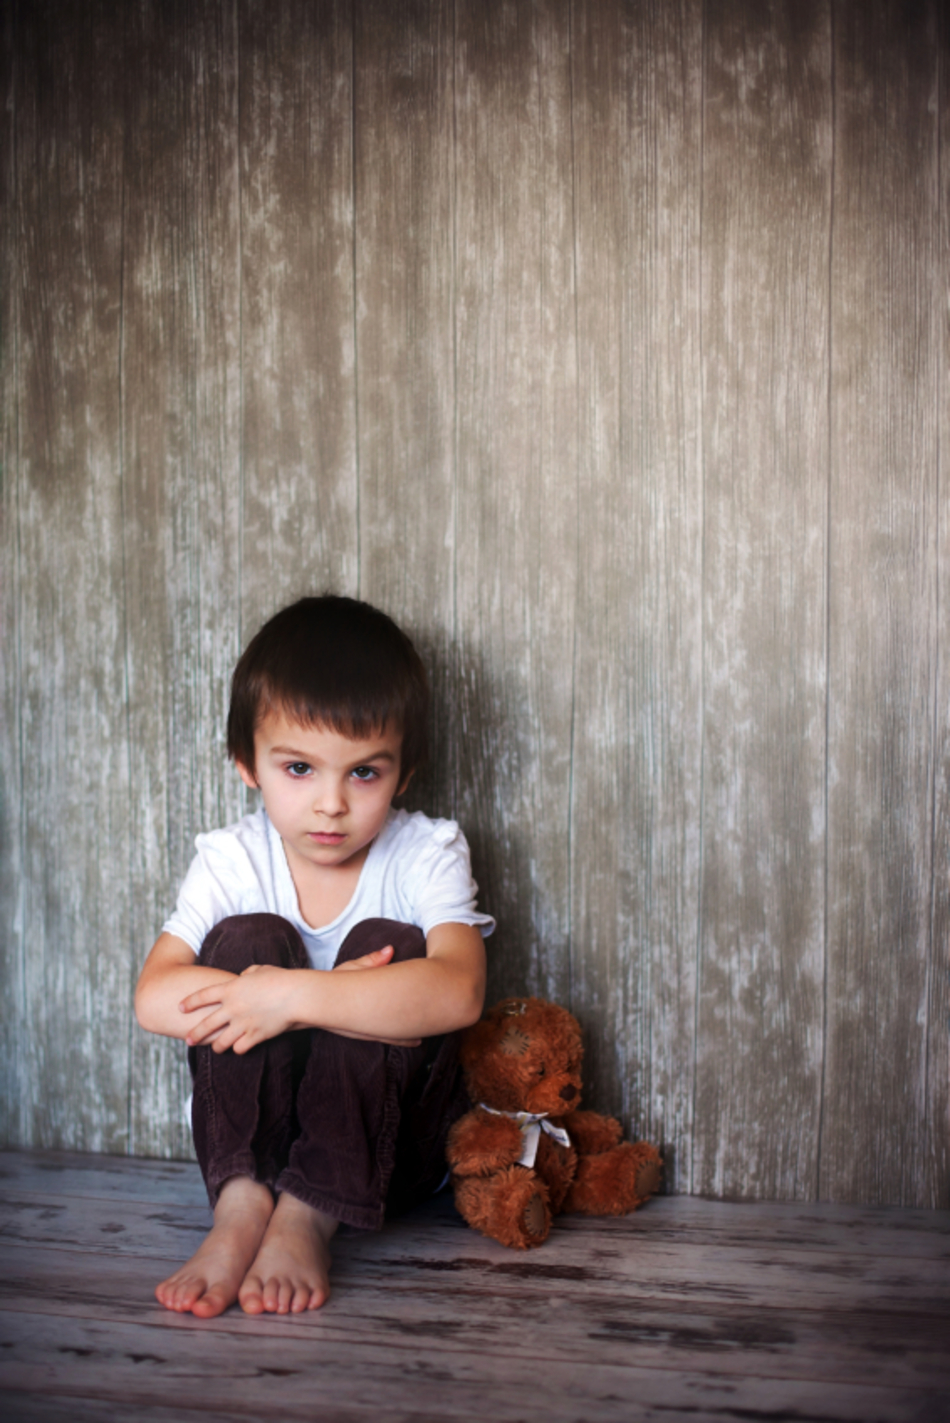 Is Your Child’s Behavior a Mental Disorder or Just Normal Development?